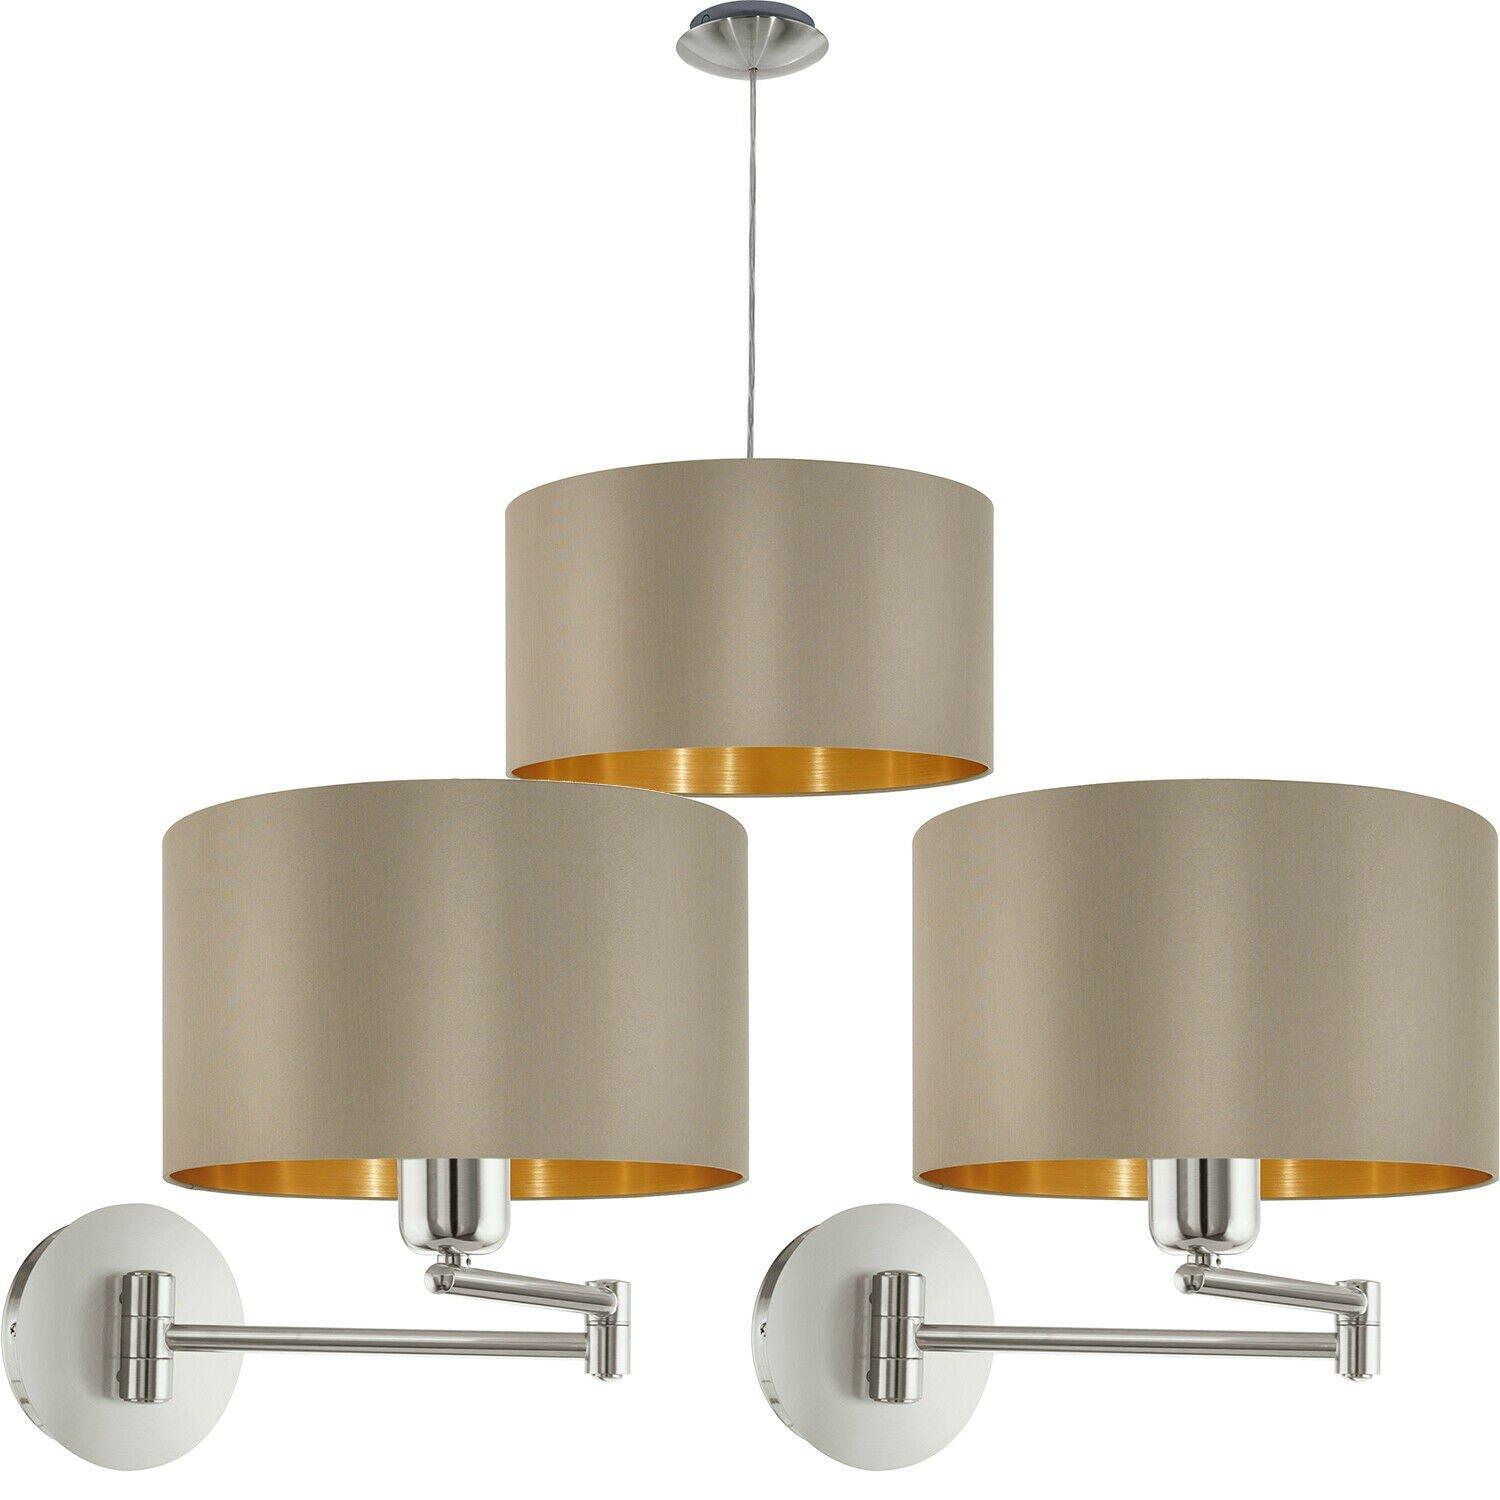 Ceiling Pendant & 2x Matching Wall Lights Taupe & Gold Fabric Feature Shade